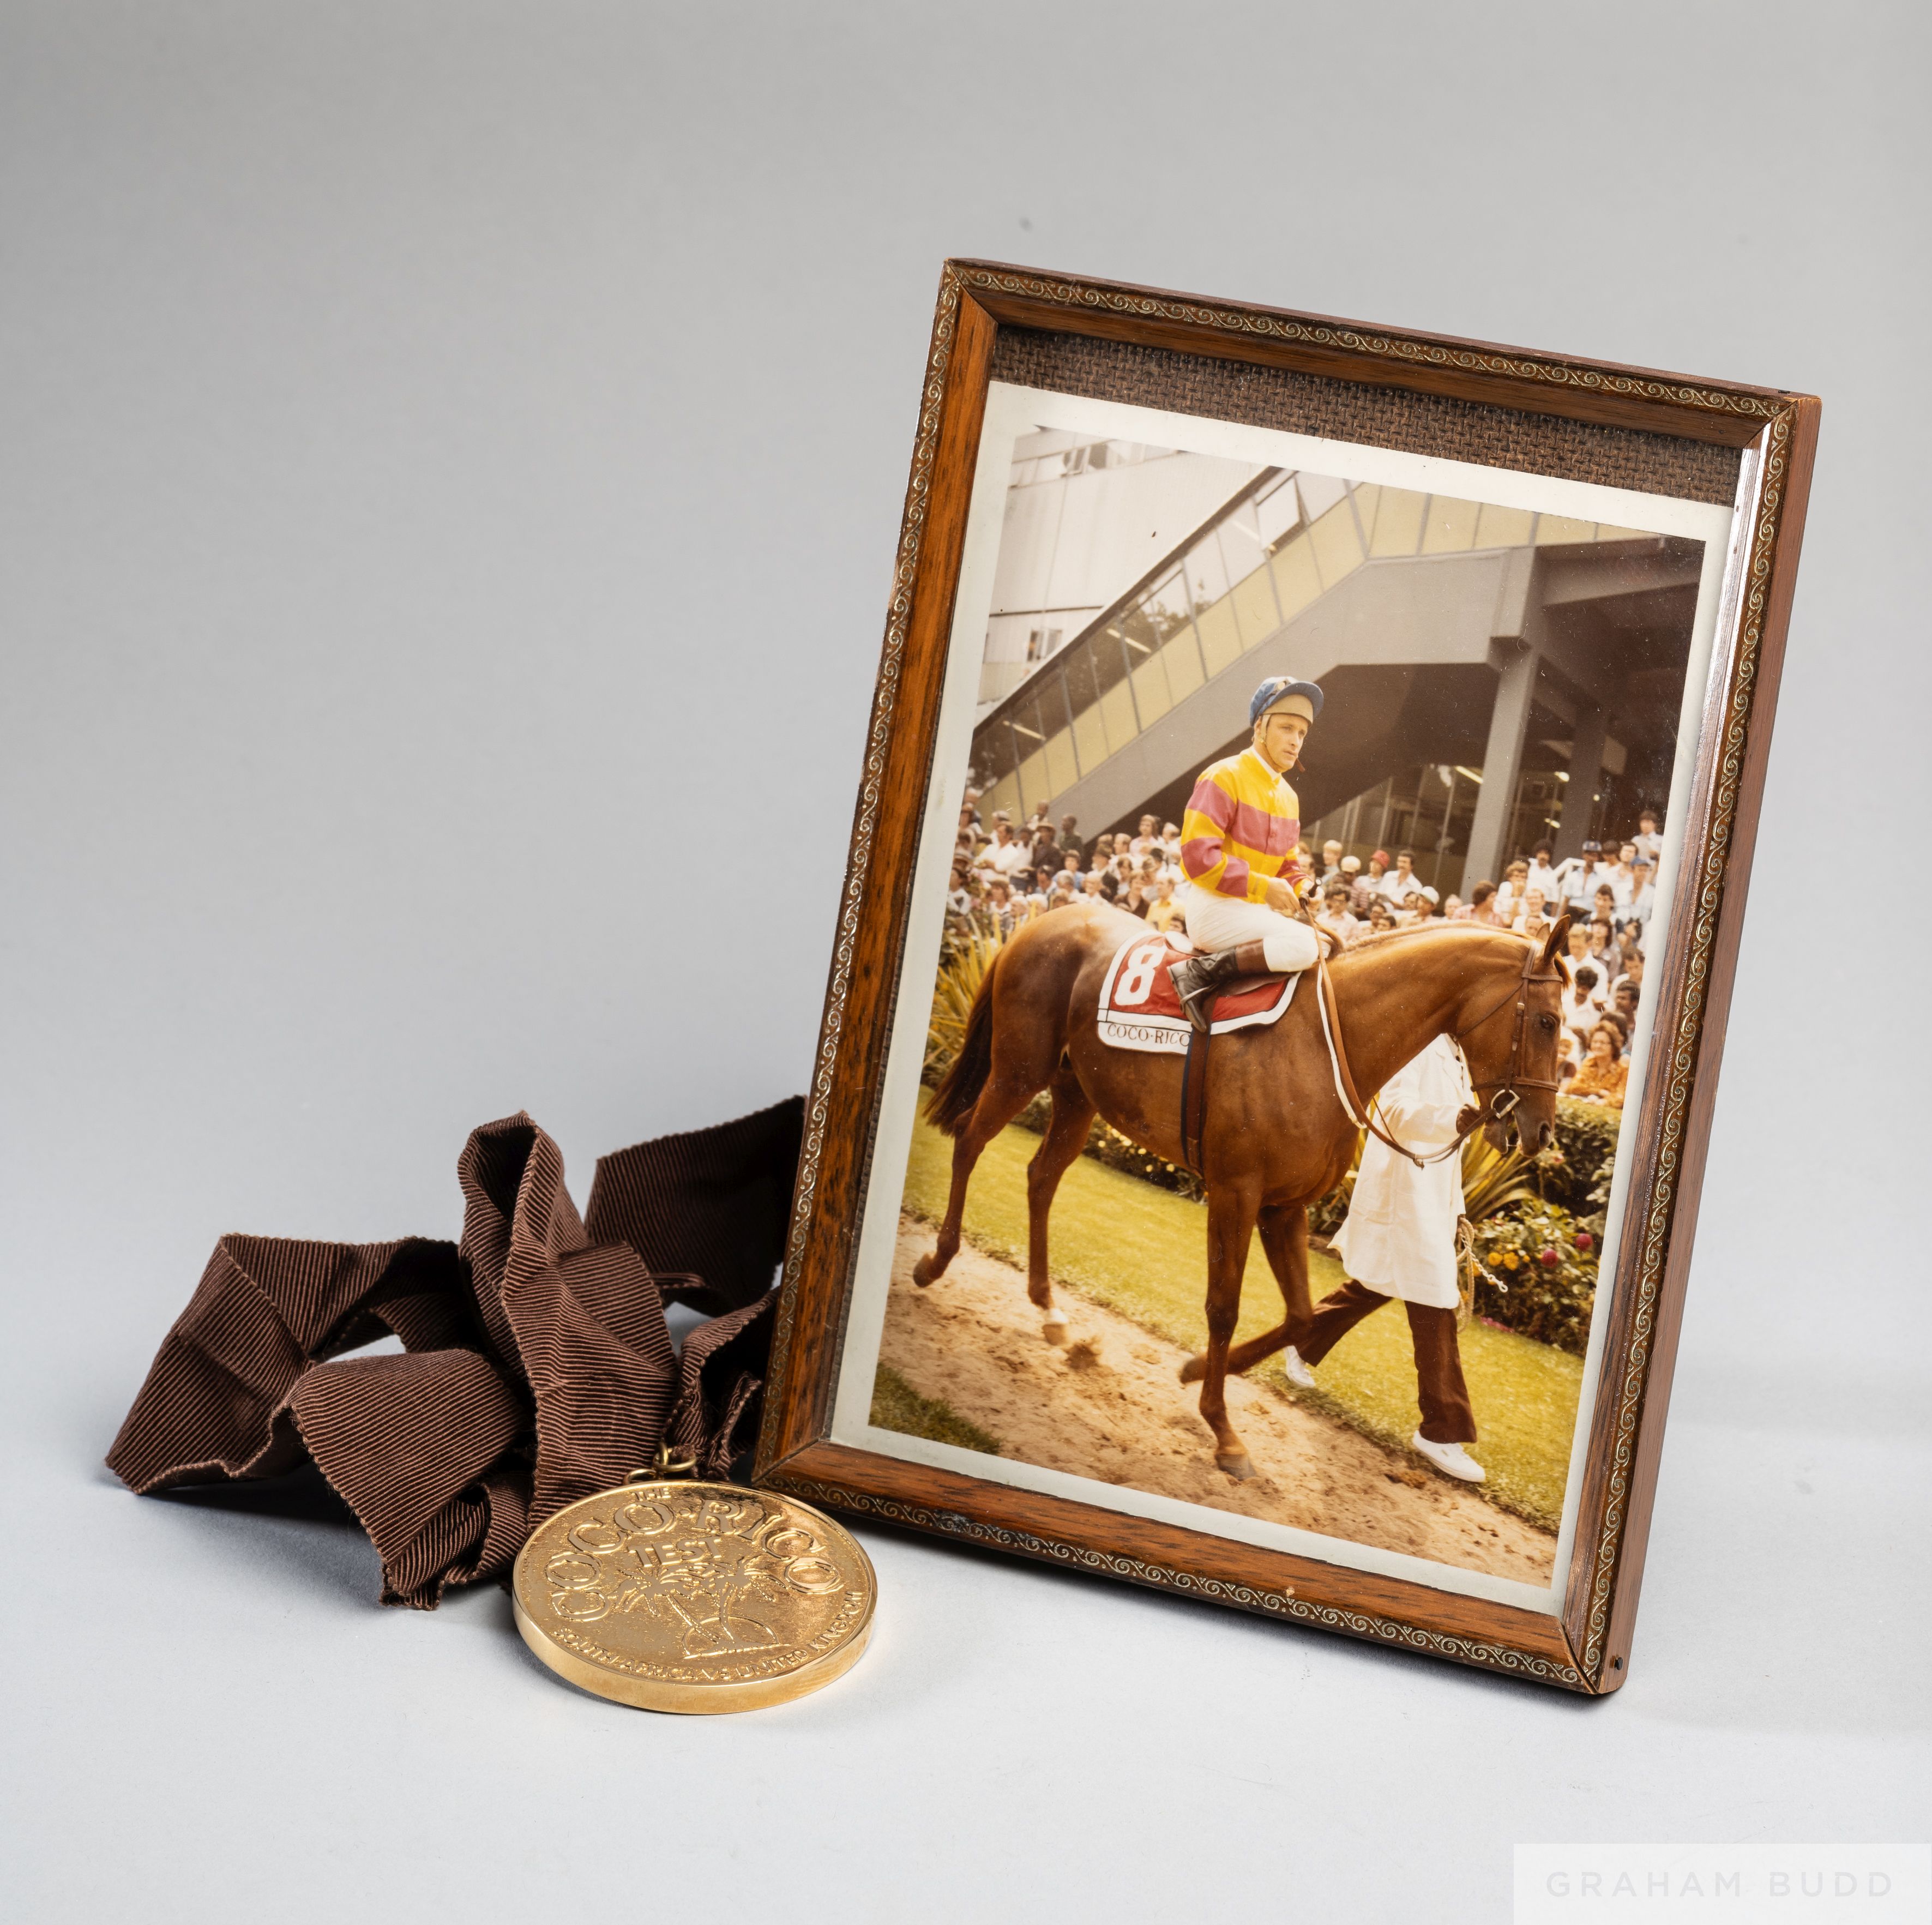 Memorabilia relating to Pat Eddery riding in international jockey competitions in South Africa,